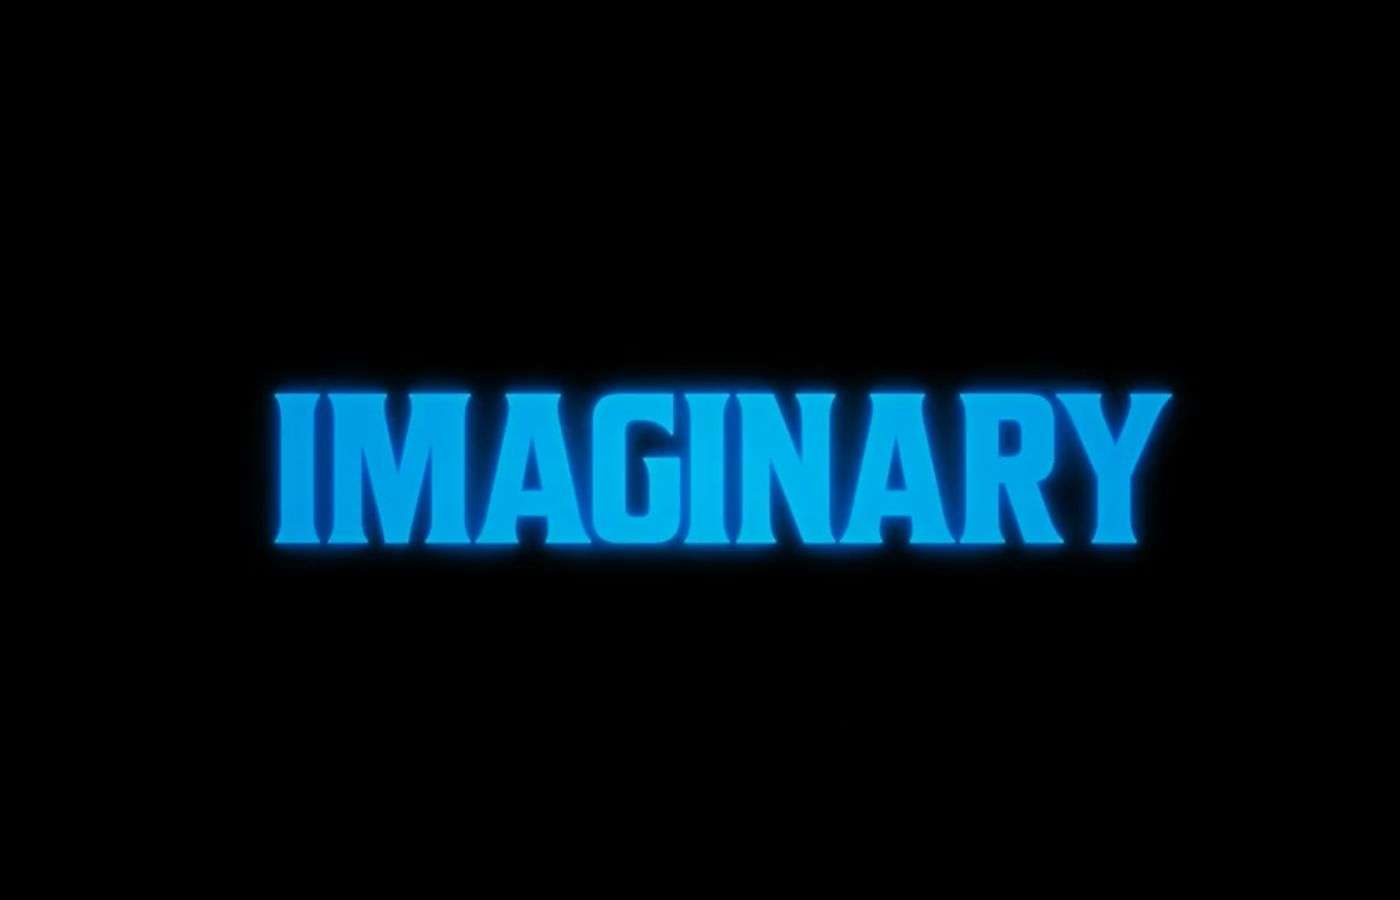 Title card for new Blumhouse Imaginary trailer